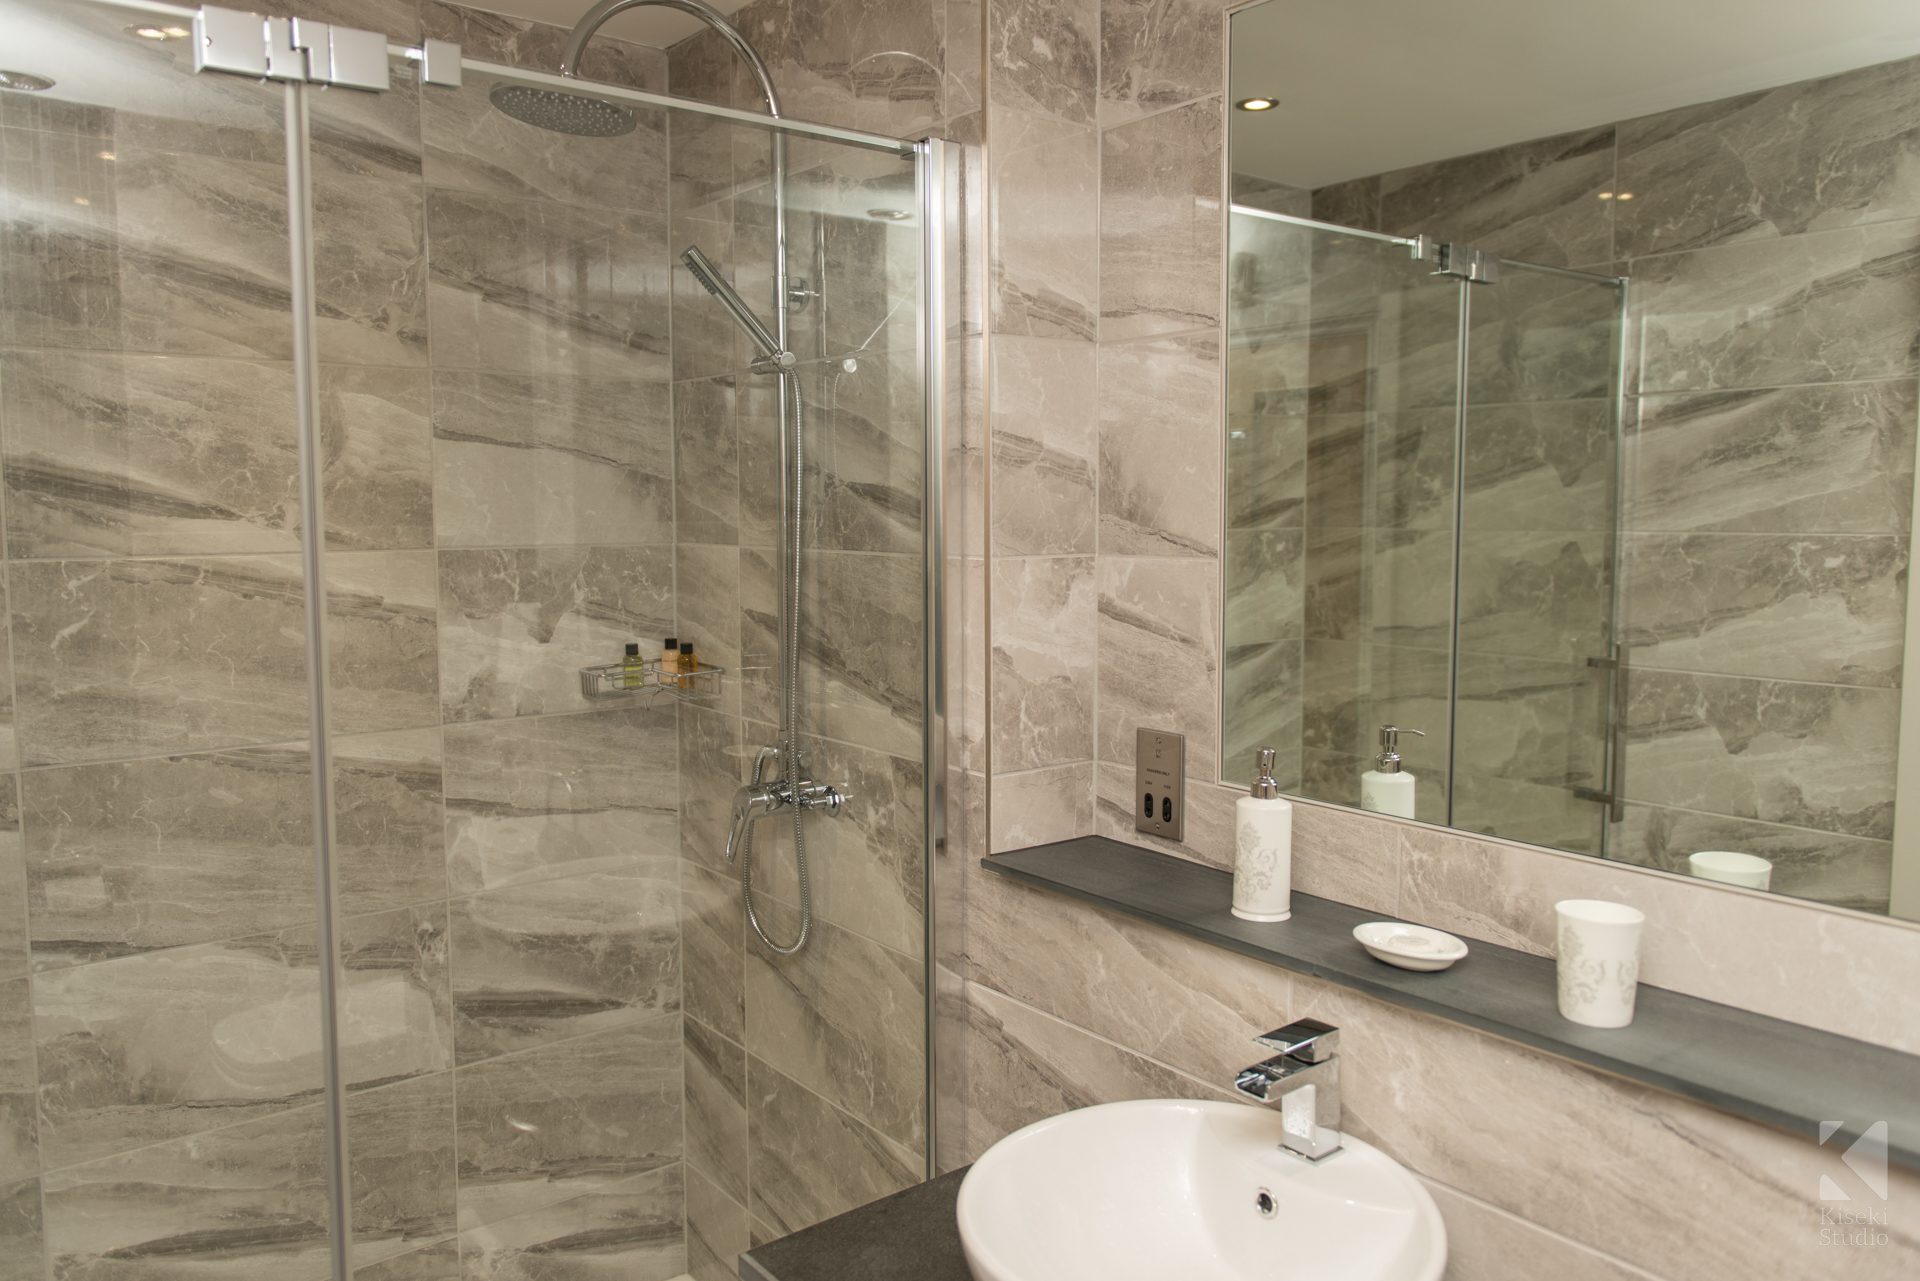 herdwicks-boutique-hotel-bathroom-modern-clean-lake-district-commercial-photography-mirror